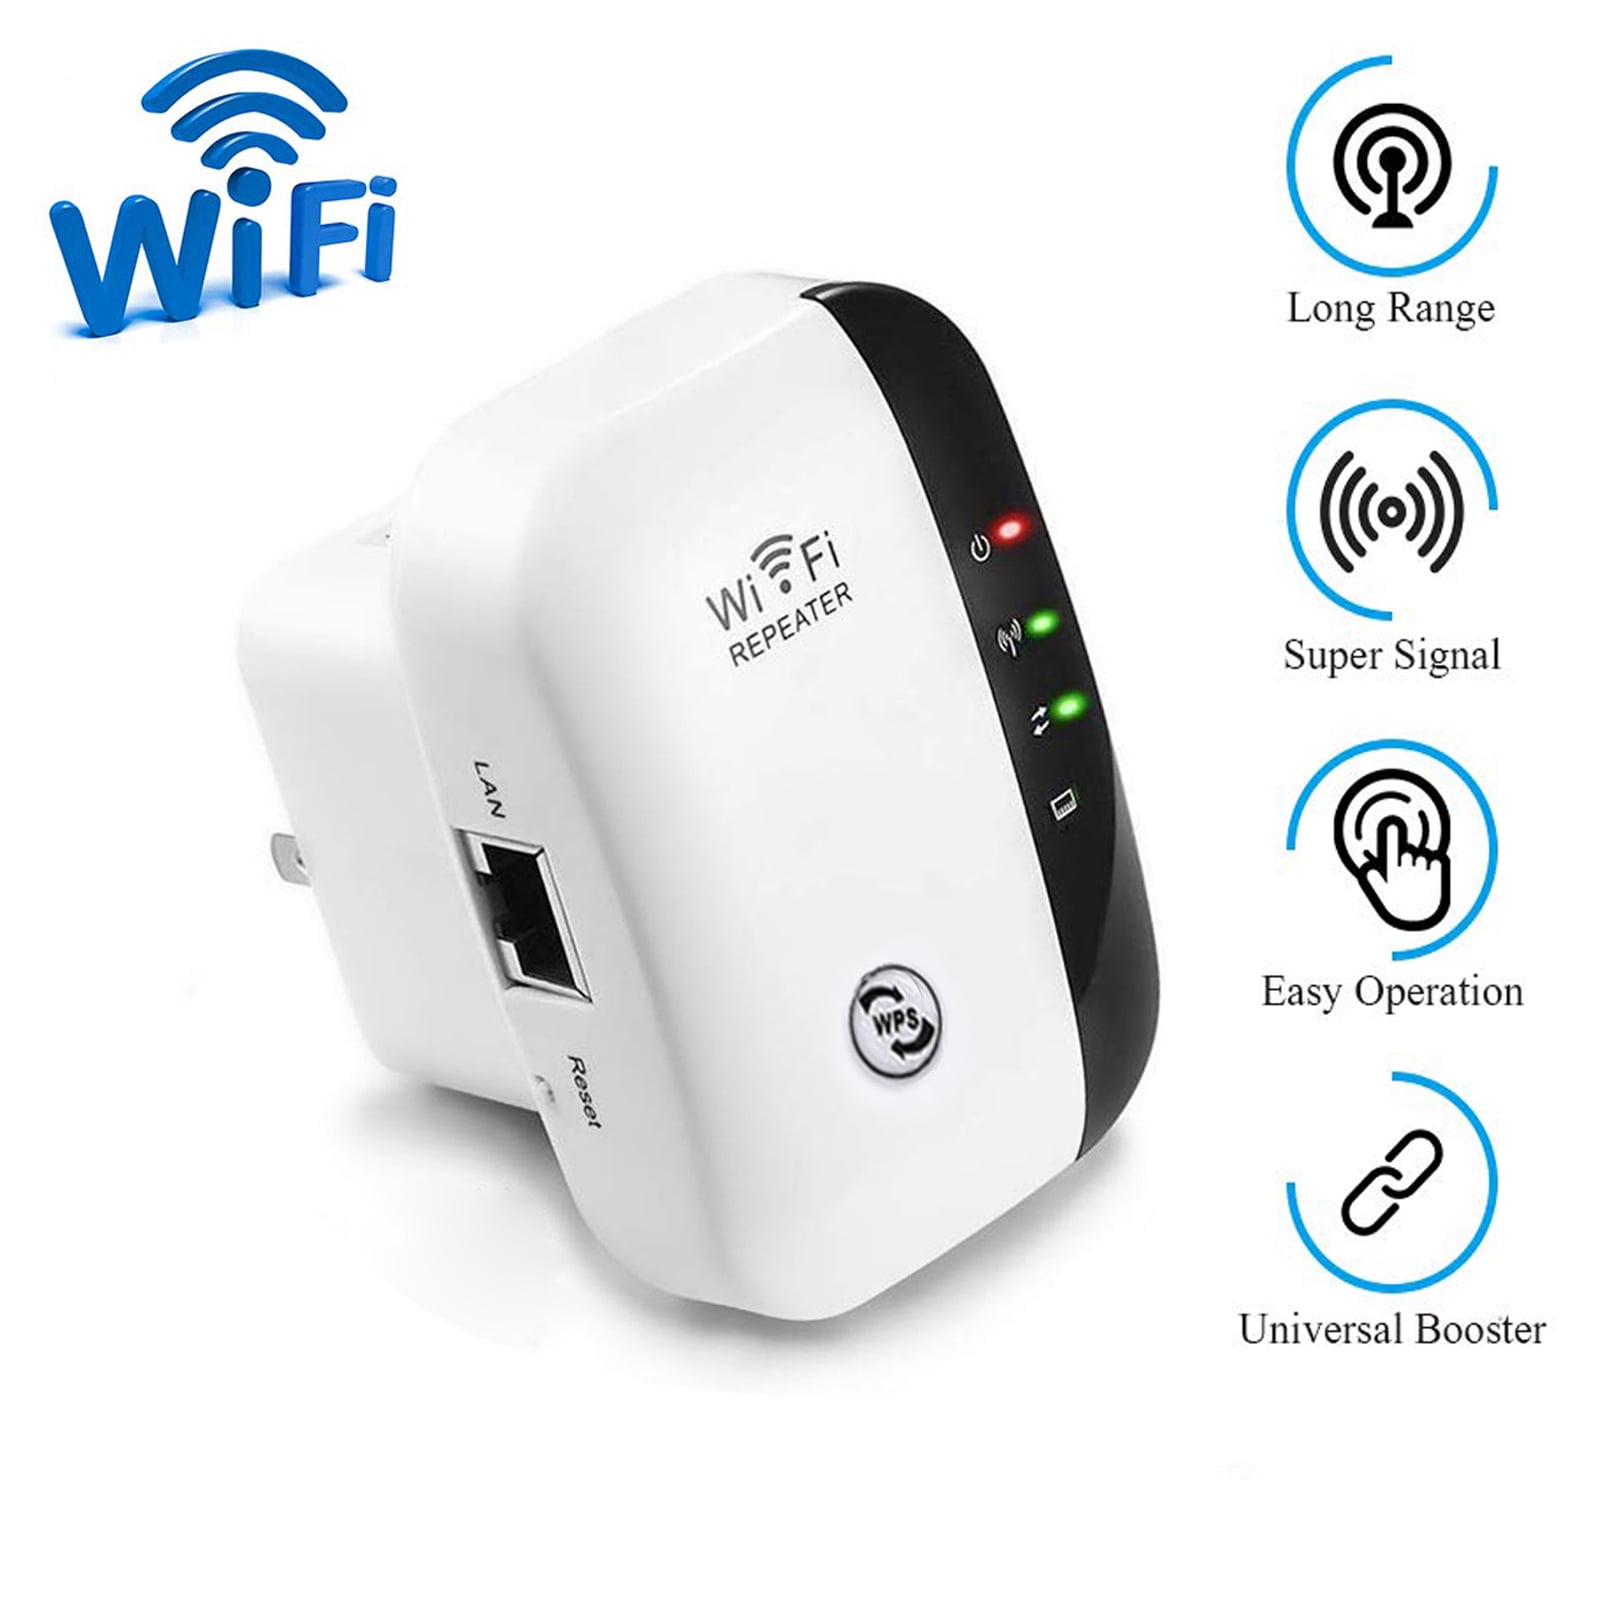 Up to 300Mbps Internet Range Booster，Access Point，Easy Set-Up（Repeater and AP Mode WiFi Range Extender，WiFi Signal Booster & Wireless Repeater 